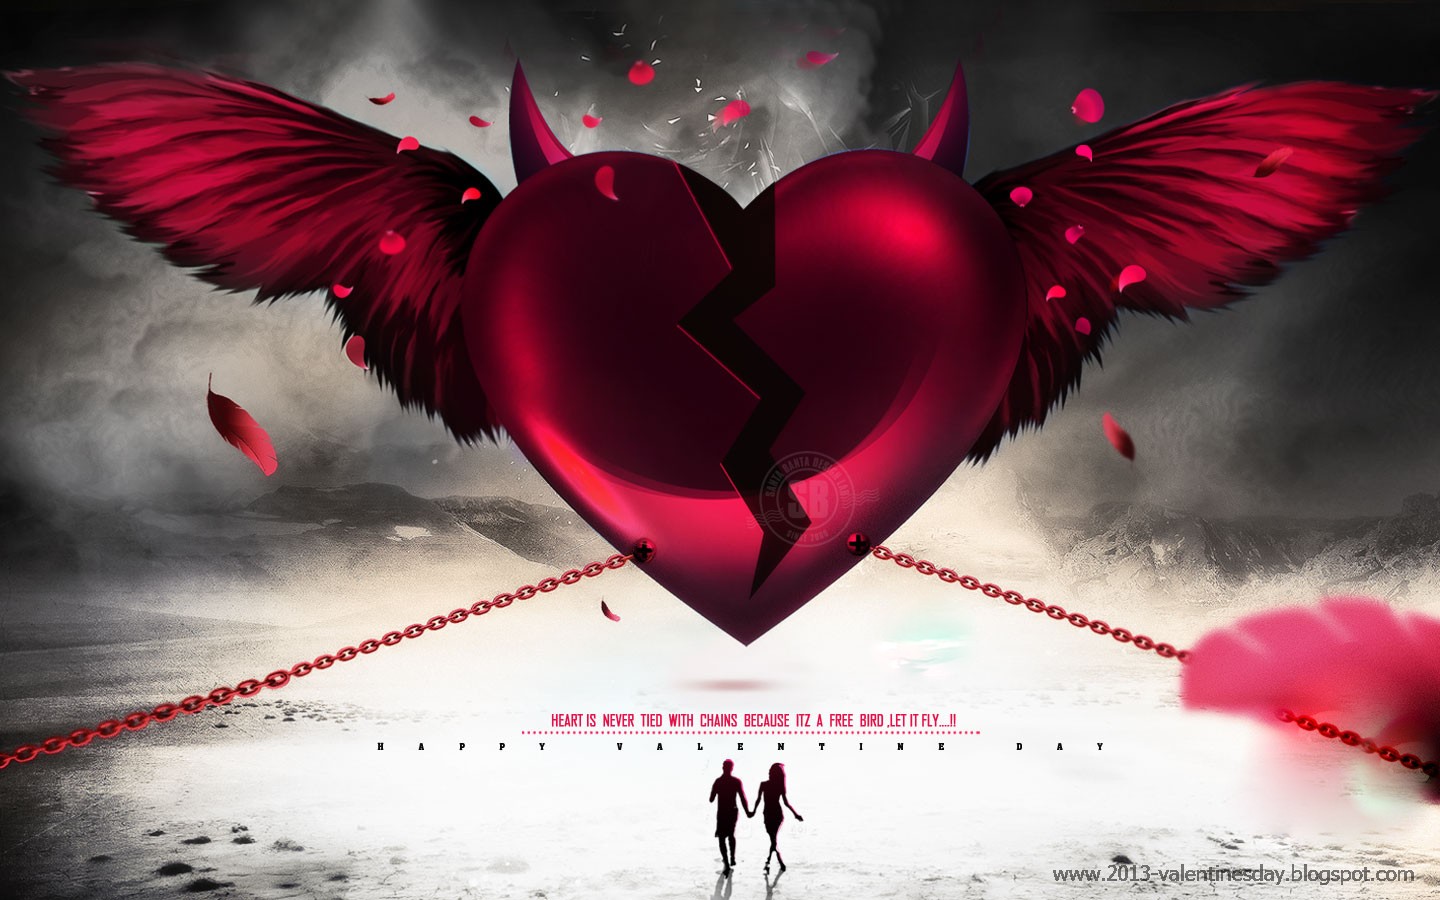 Happy Valentines Day HD Wallpaper 1024px 1920px